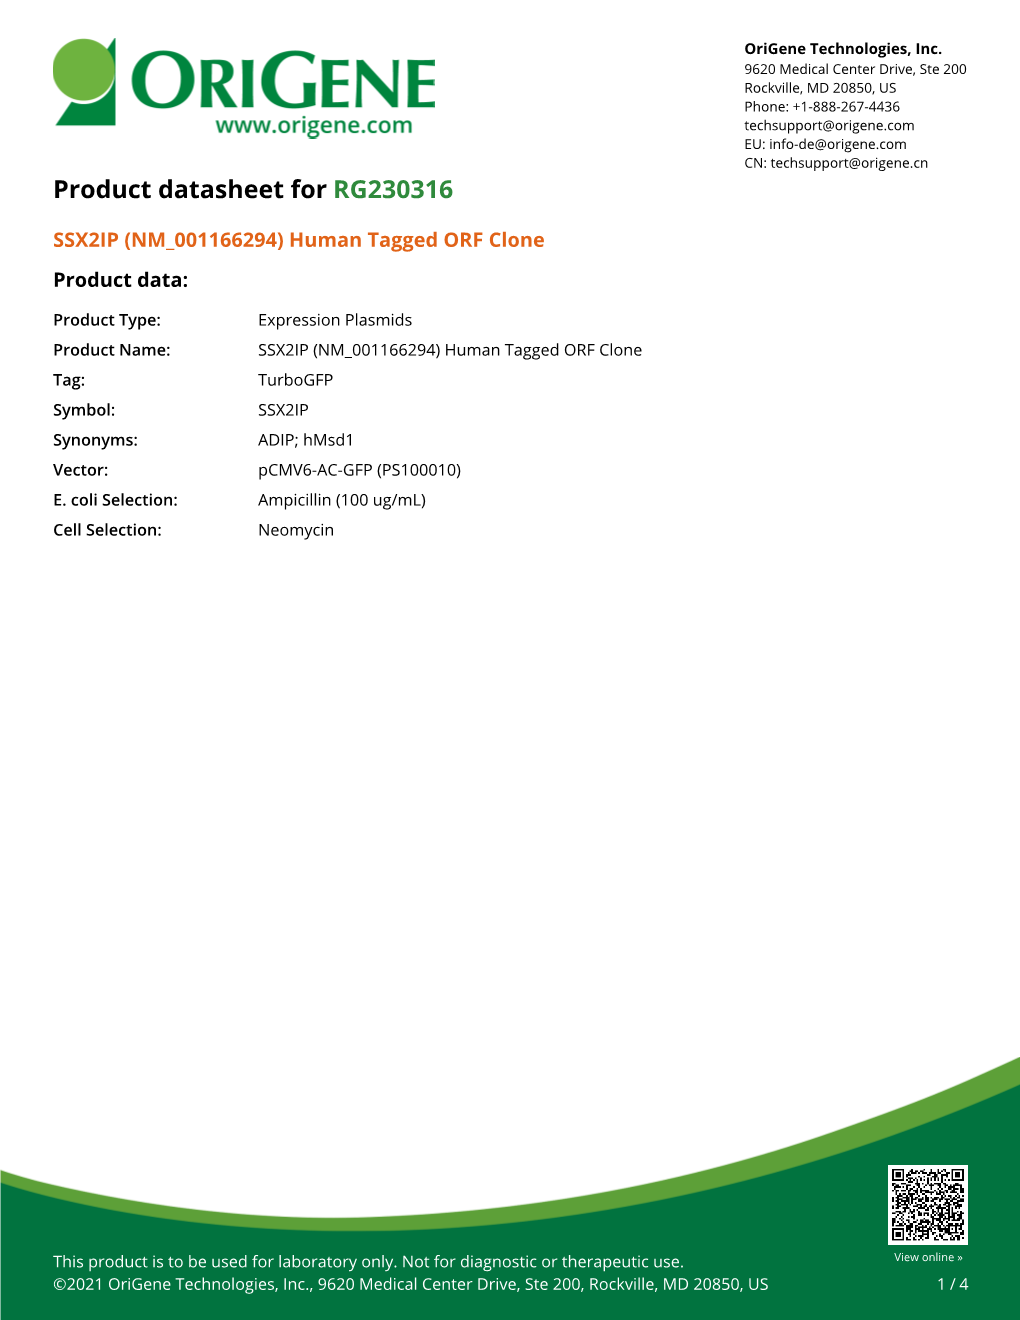 SSX2IP (NM 001166294) Human Tagged ORF Clone Product Data